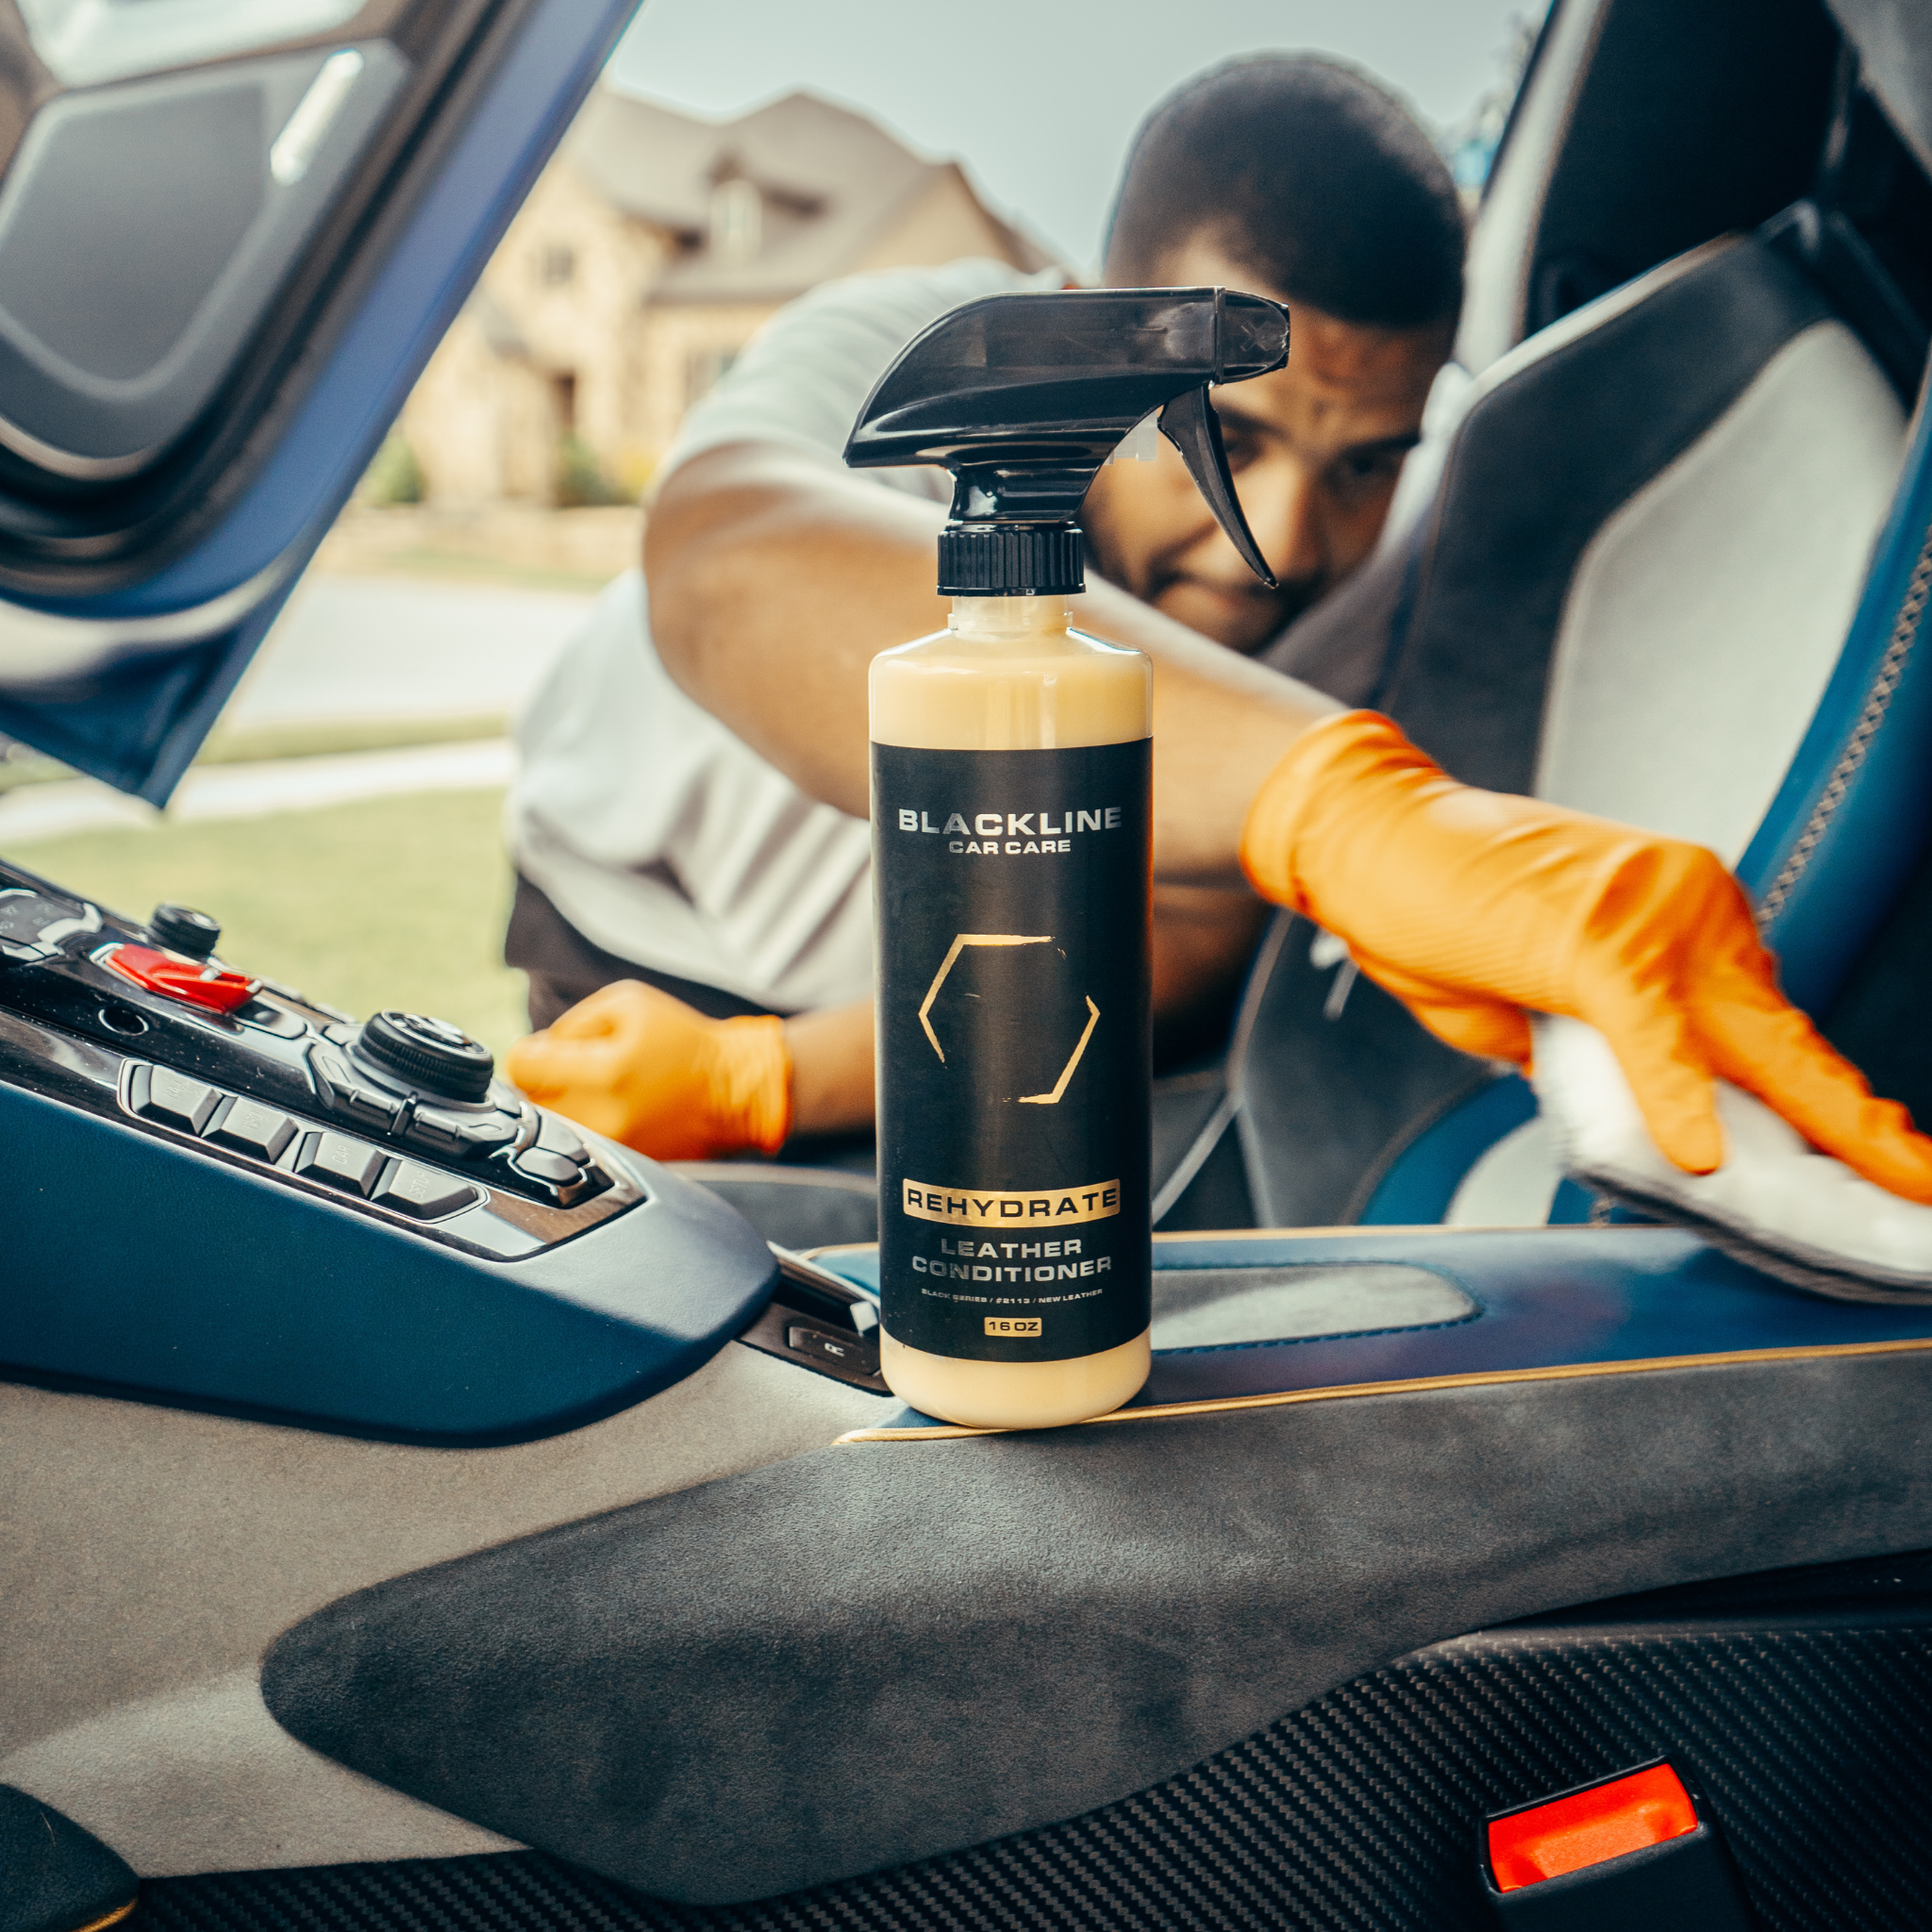 REHYDRATE LEATHER CONDITIONER